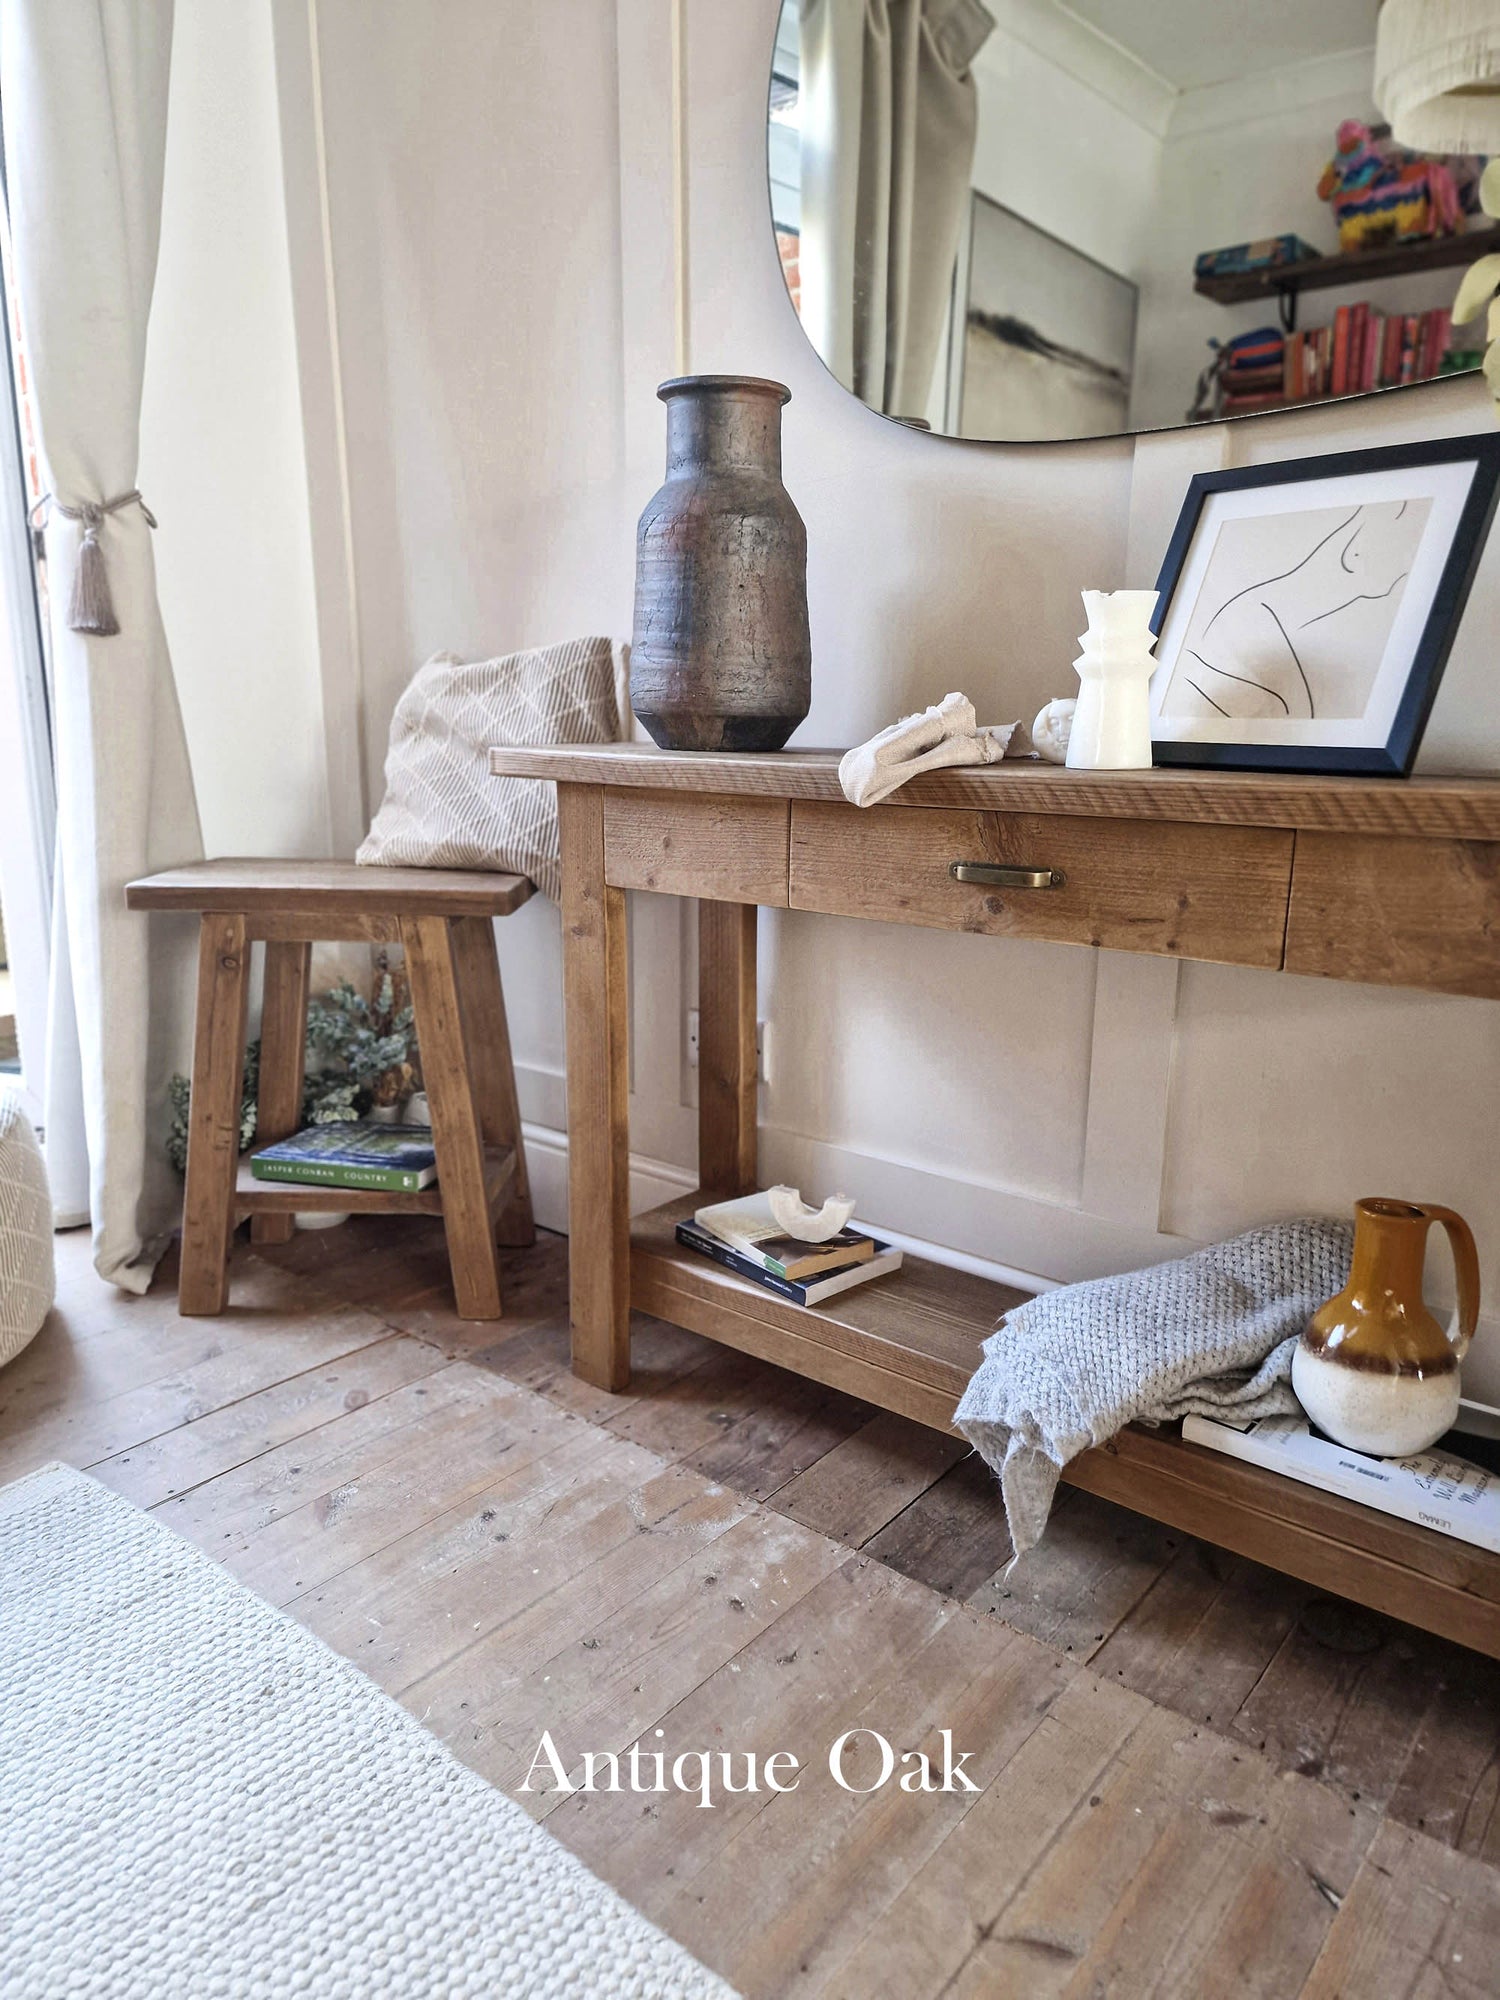 Shore Console Table with Drawer